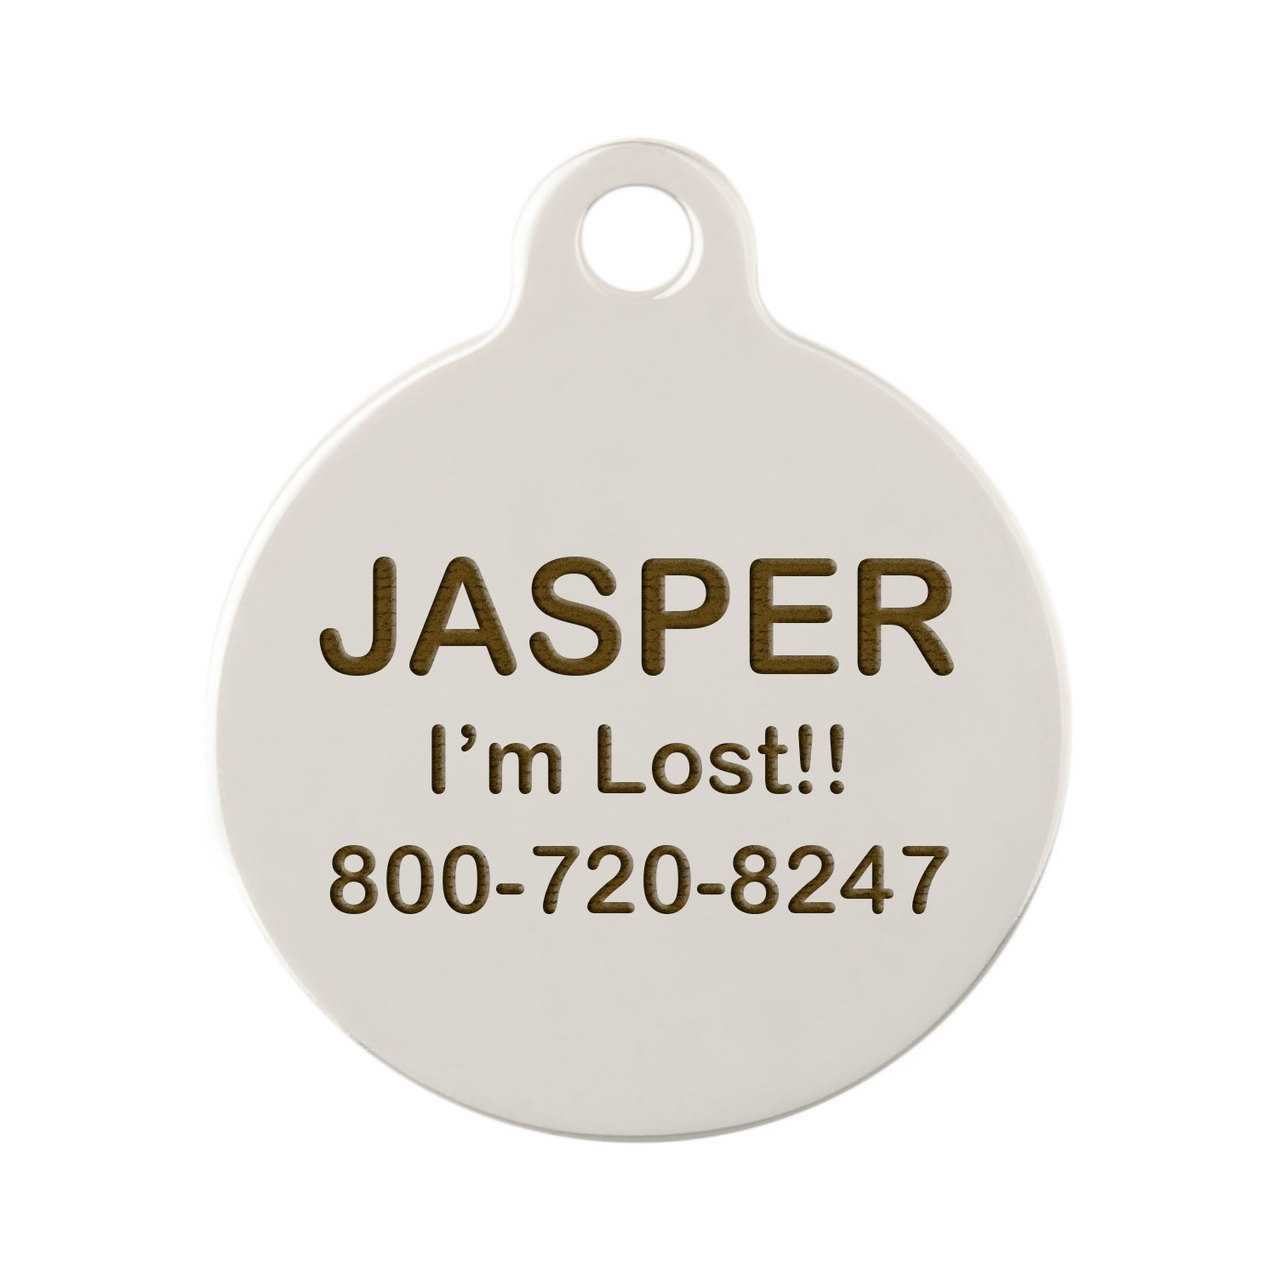 Marriage Proposal Dog ID Tag Backside Engraving dogIDs